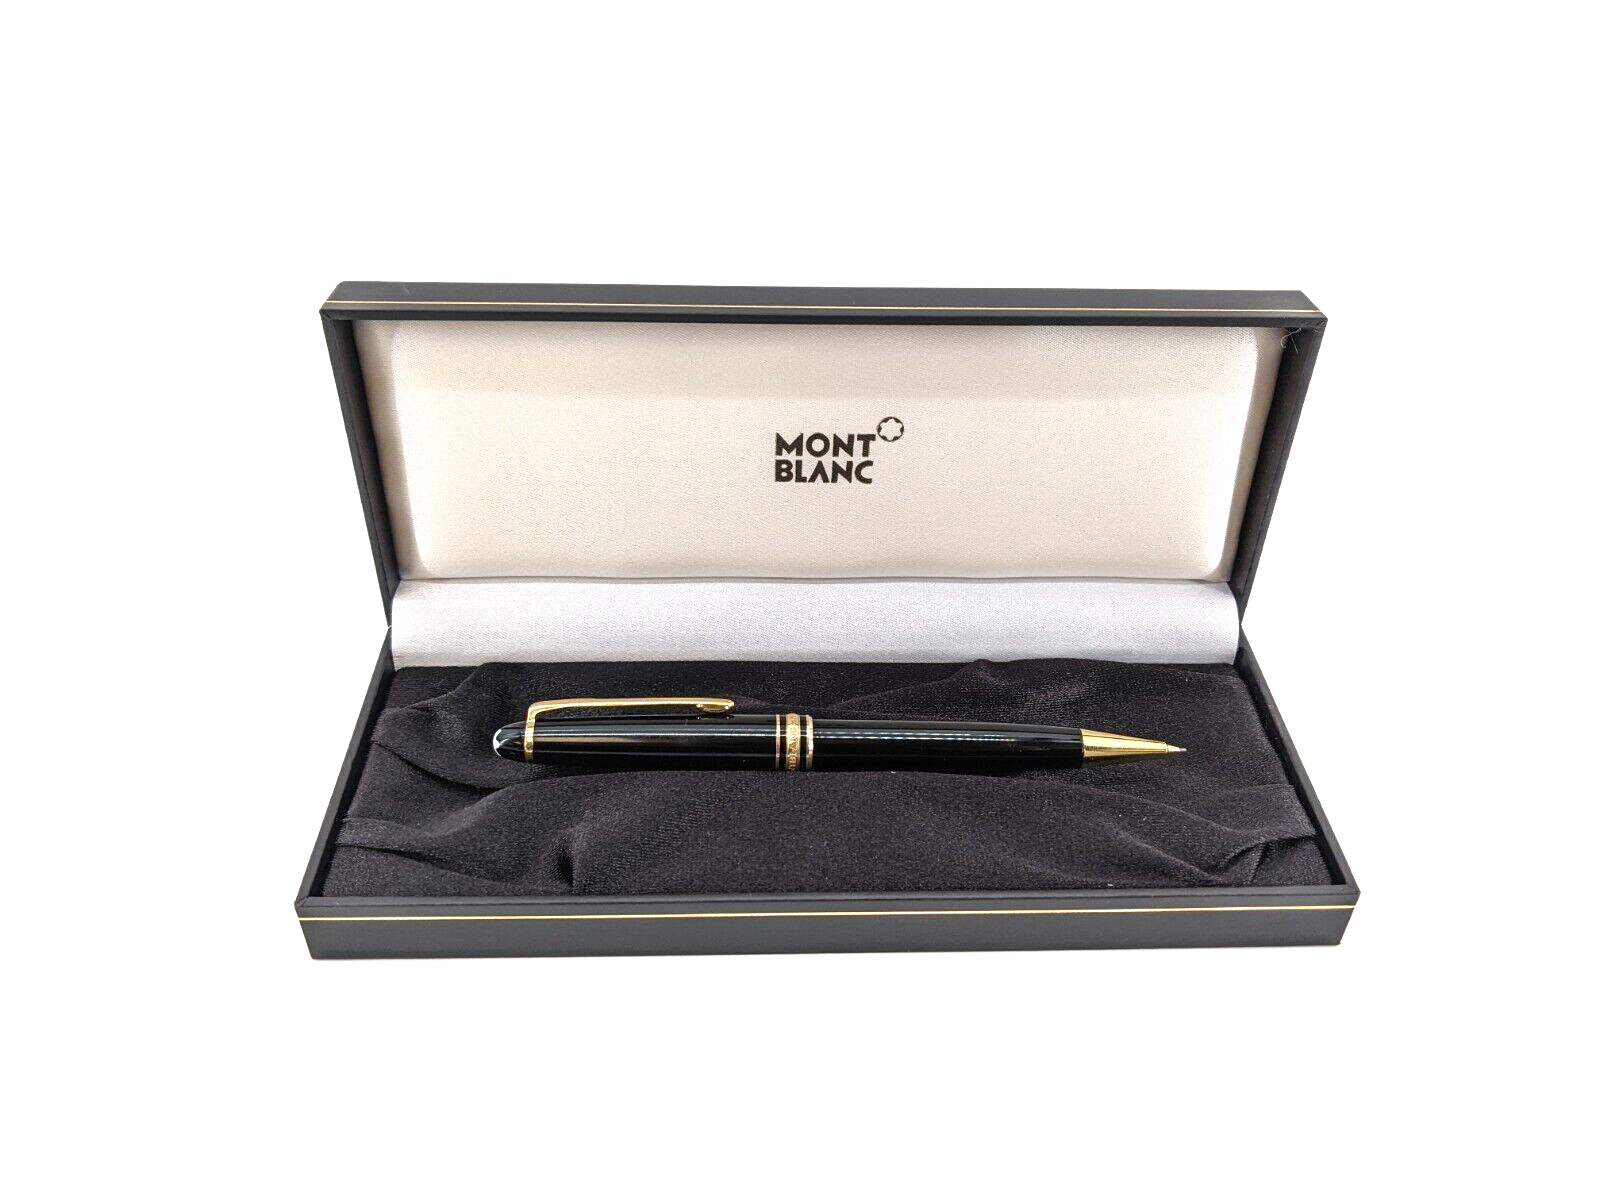 Montblanc Mechanical Pencil .7mm with Box